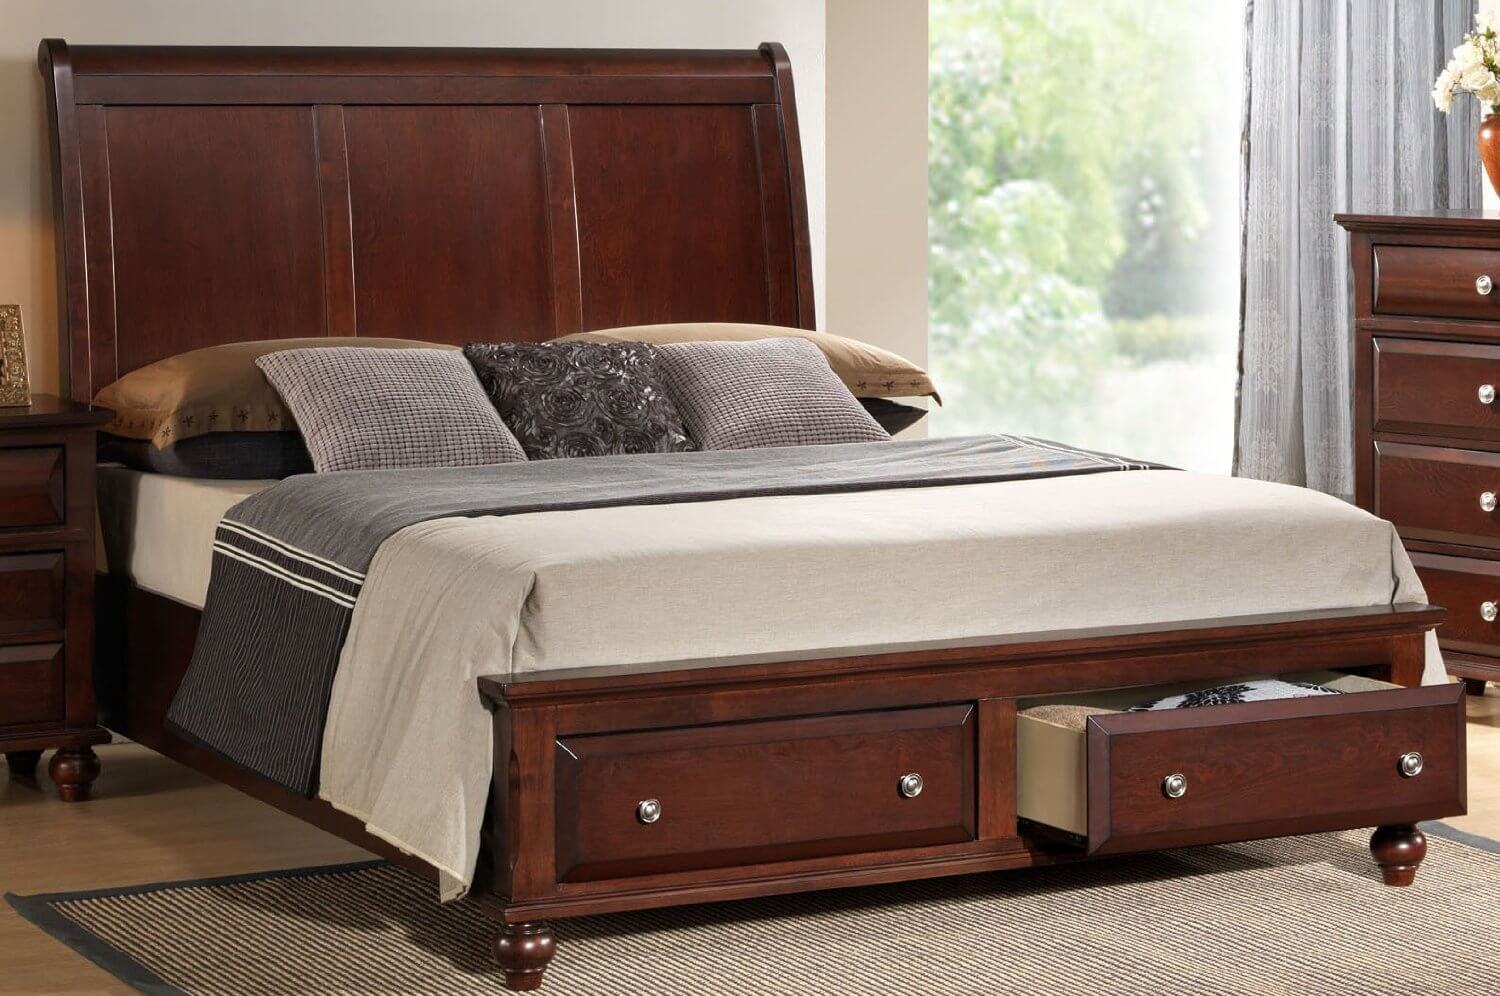 queen size solid wood beds 25 incredible queen-sized beds with storage drawers underneath KSSLTBC